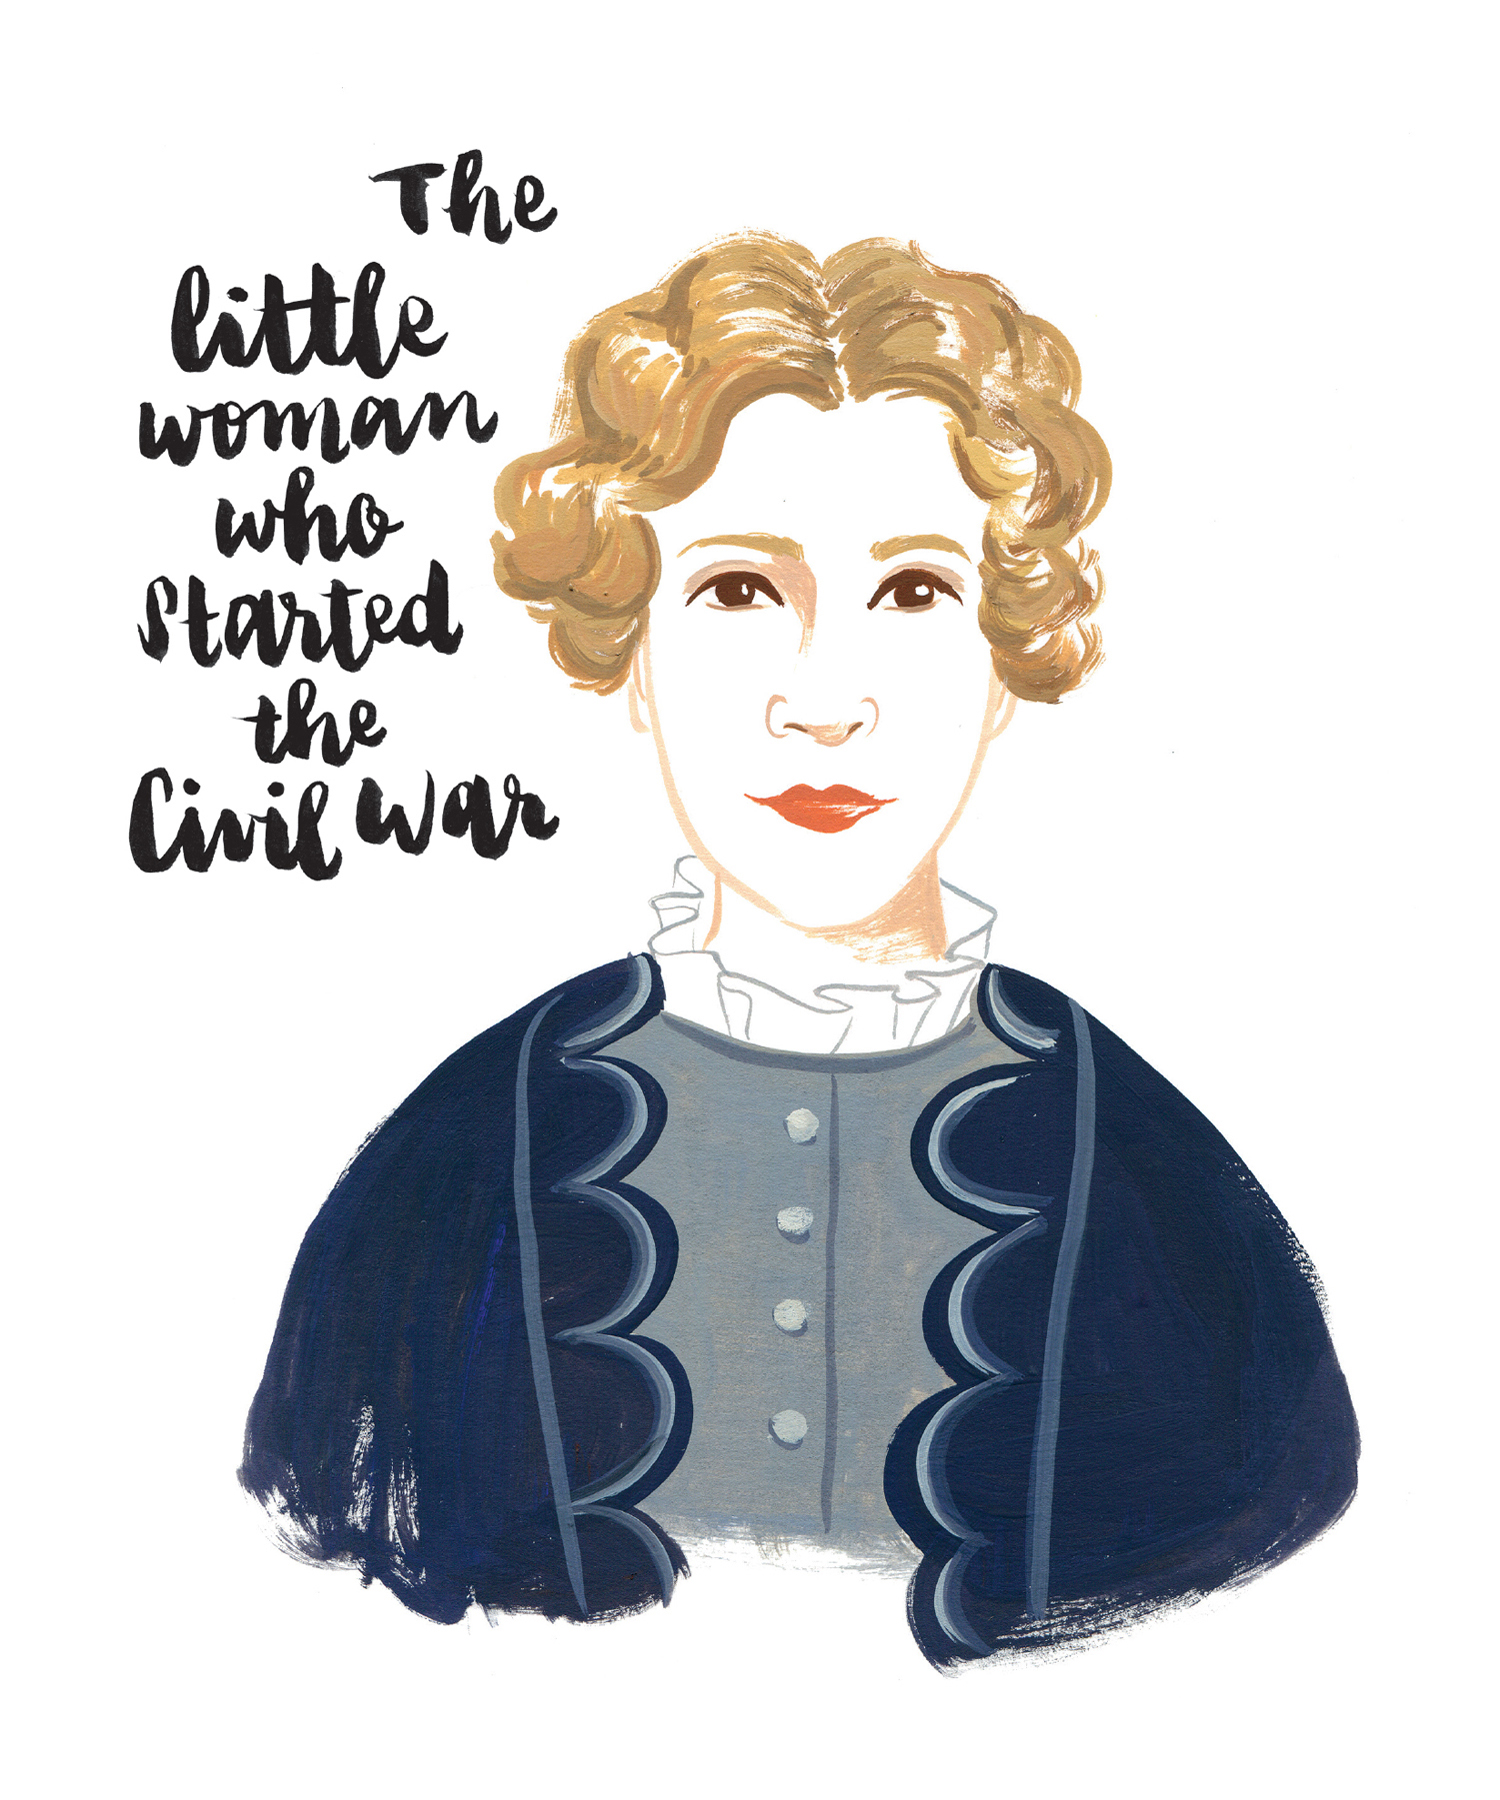 The little woman who started the Civil War